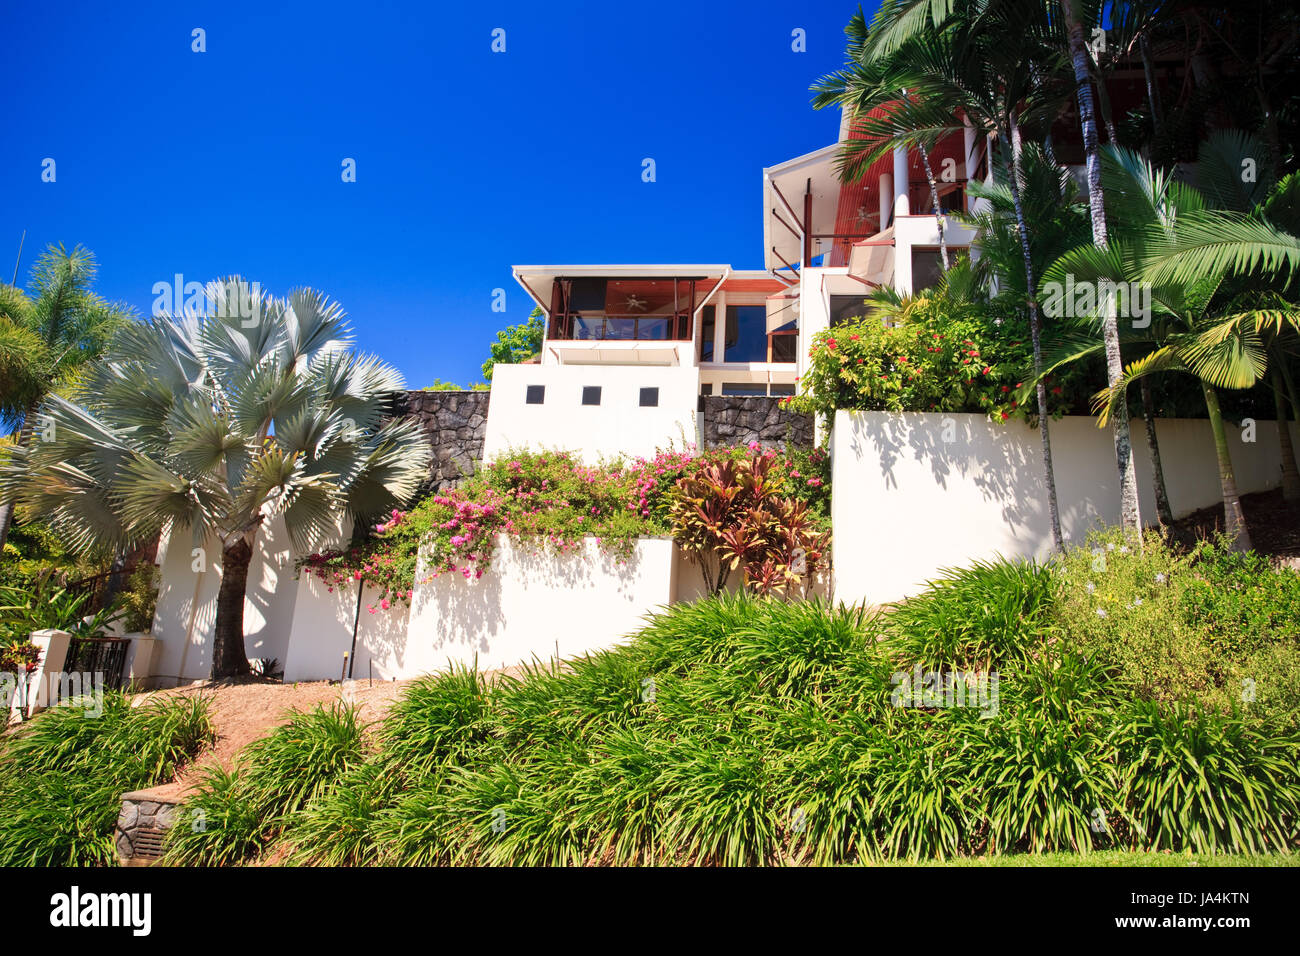 house, building, city, town, holiday, vacation, holidays, vacations, summer, Stock Photo